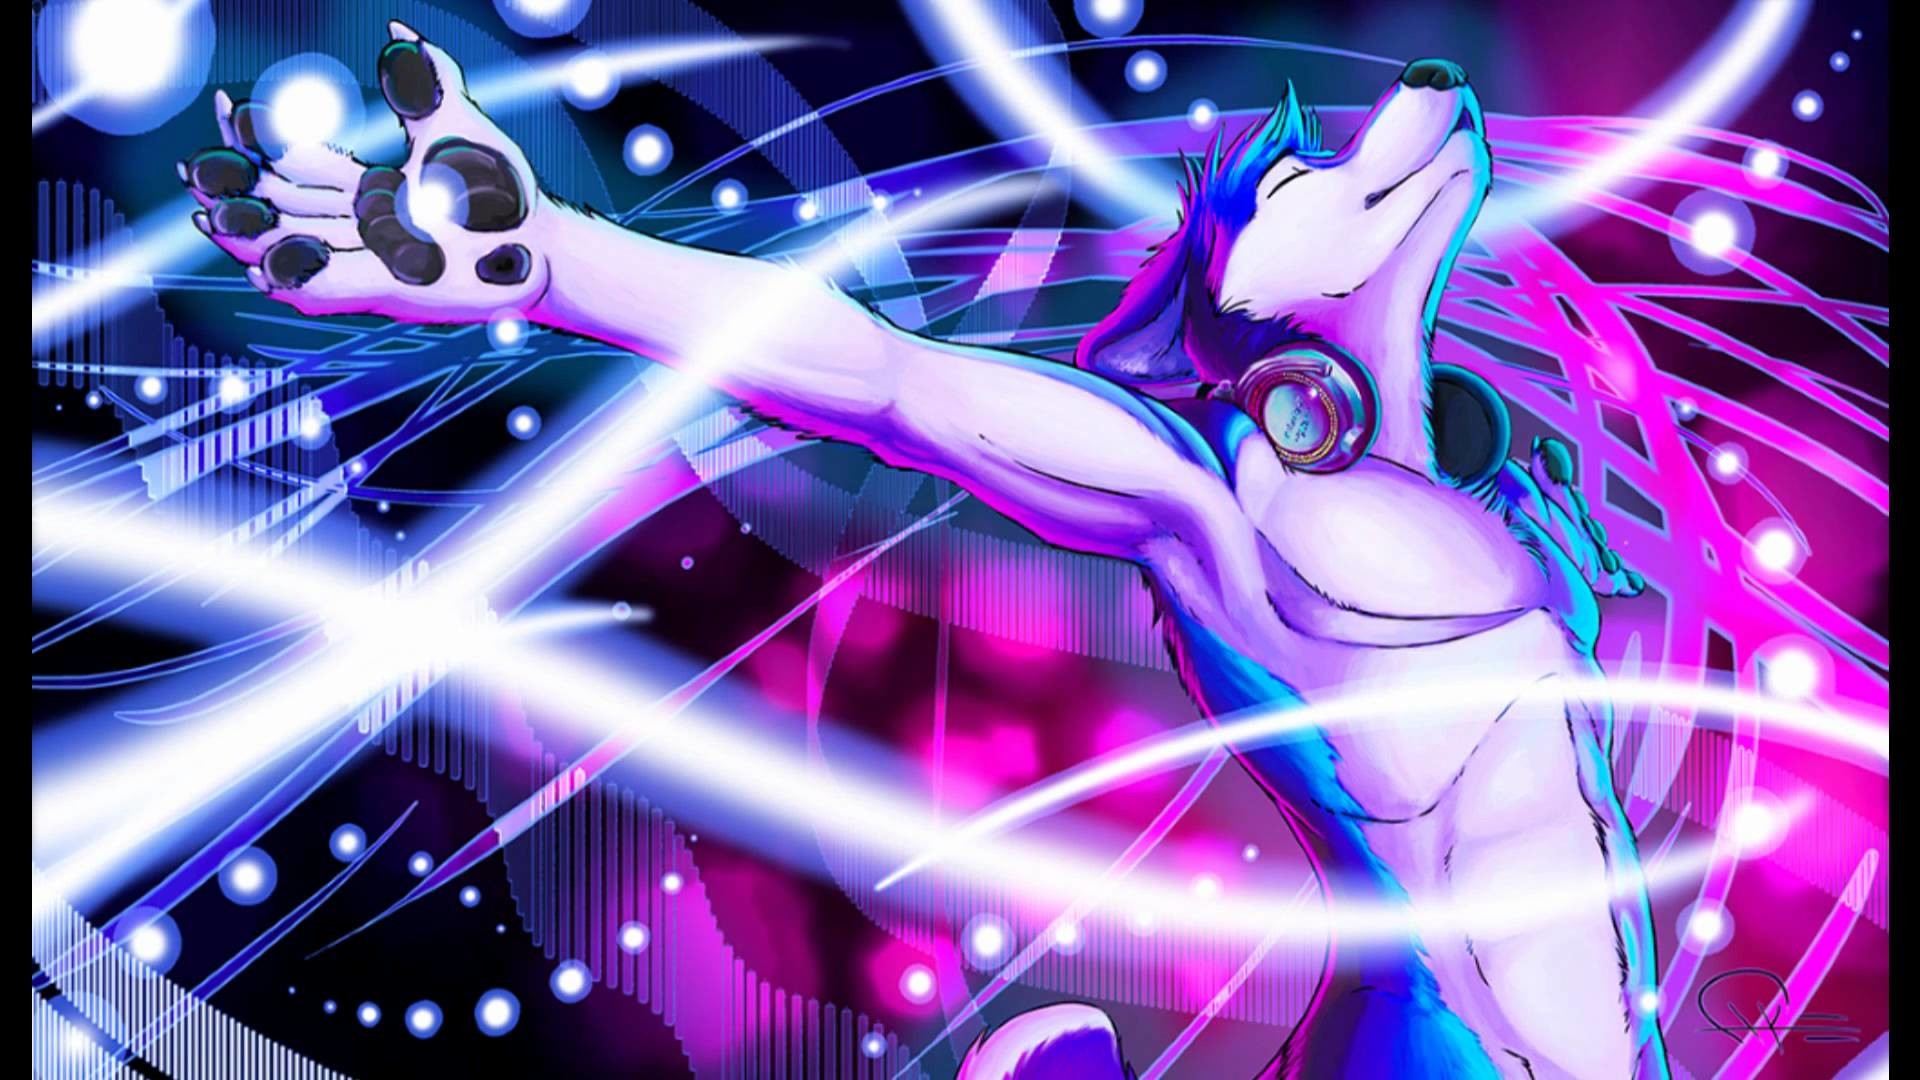 1920x1080 Furry Rave by Shadowpaw76 on DeviantArt Furry Rave Desktop By Rave Wallpaper  ...